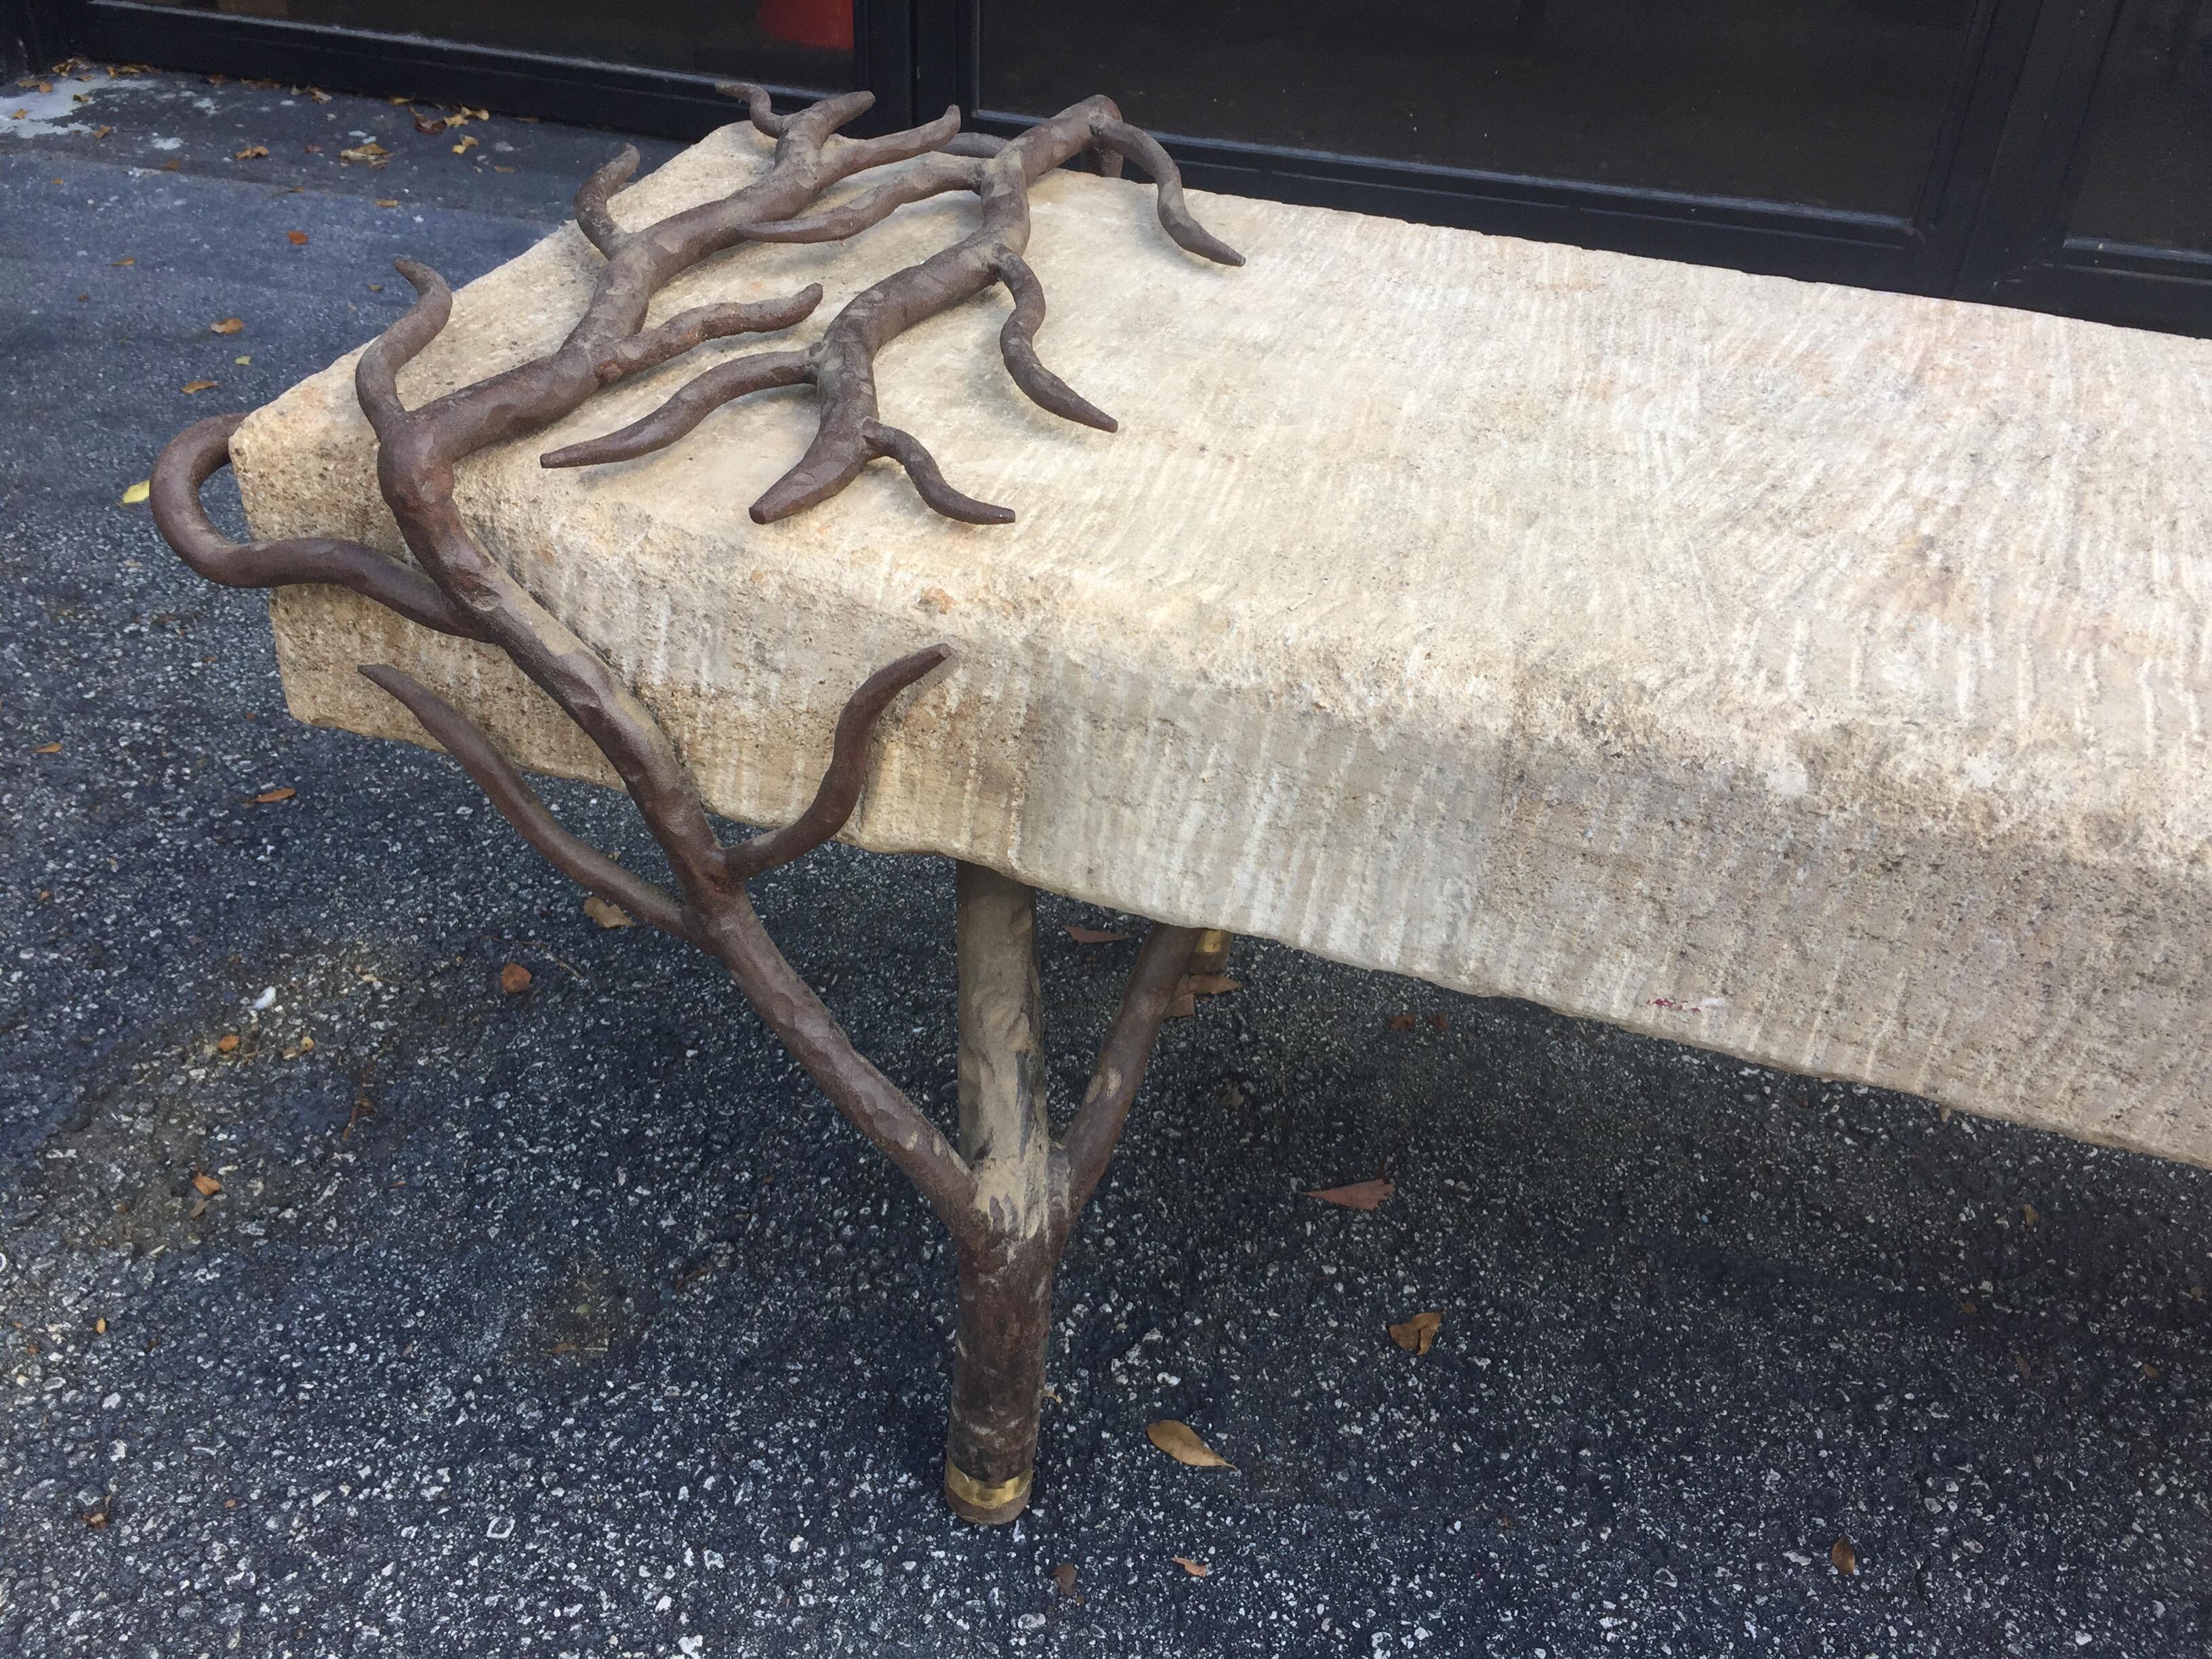 An Important uniquely forged iron in thorn like branches design; Solid carved stone garden bench, very important piece - this bench can be disassembled for easier placement or moved - it is a very heavy bench.